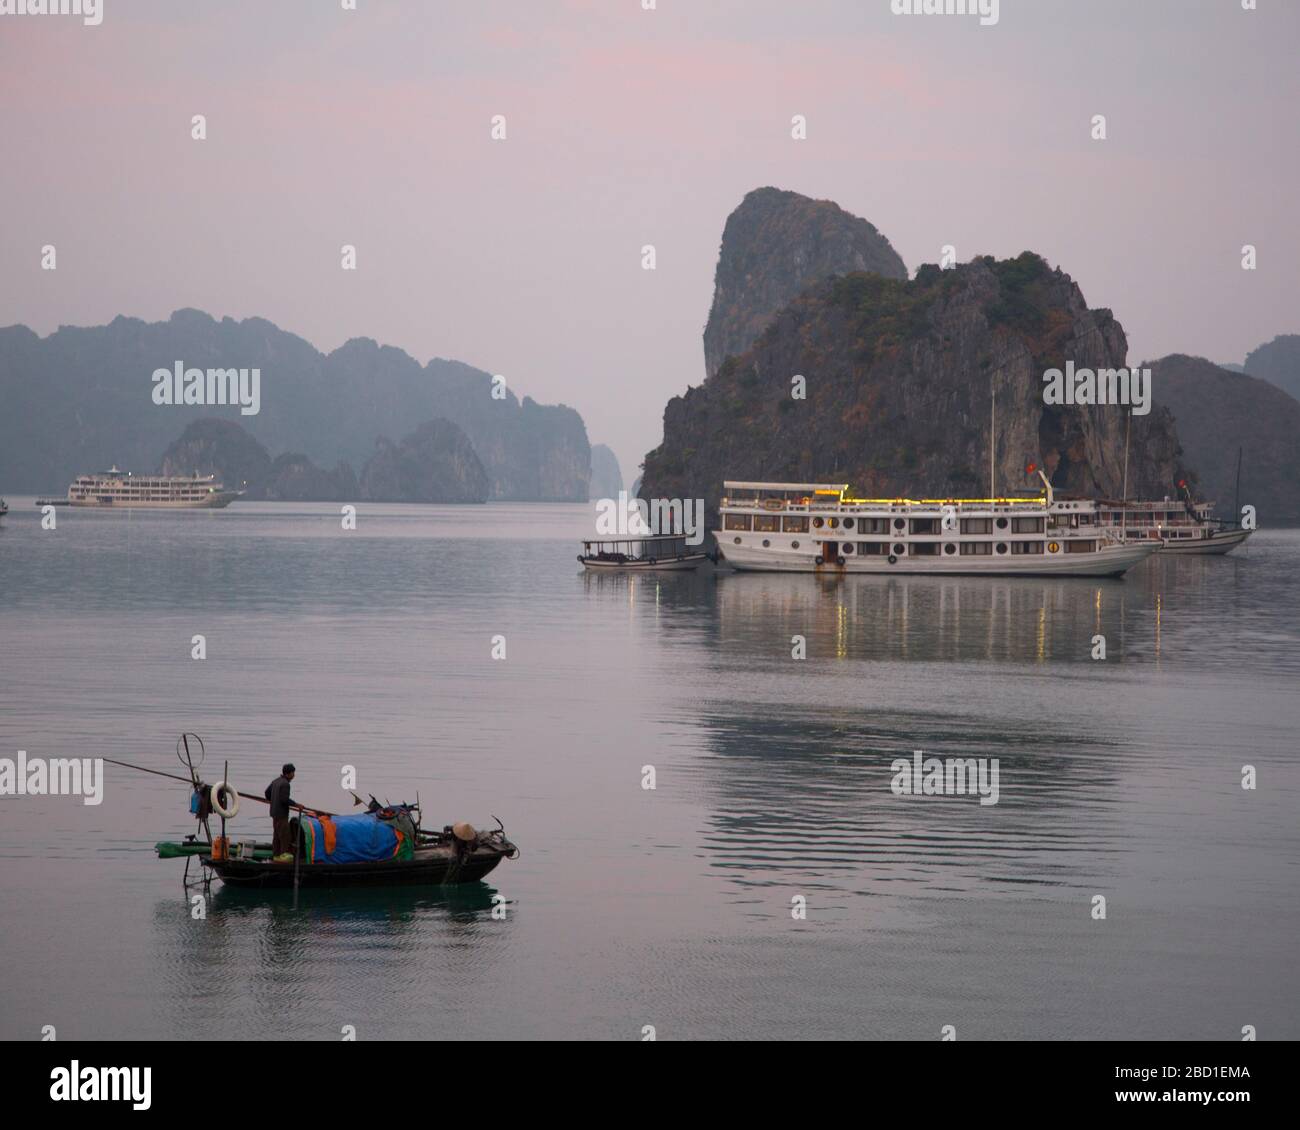 An Early morning view of Ha Long Bay with local fishing boats and Tour Boats among the Limestone cliff formations, Stock Photo